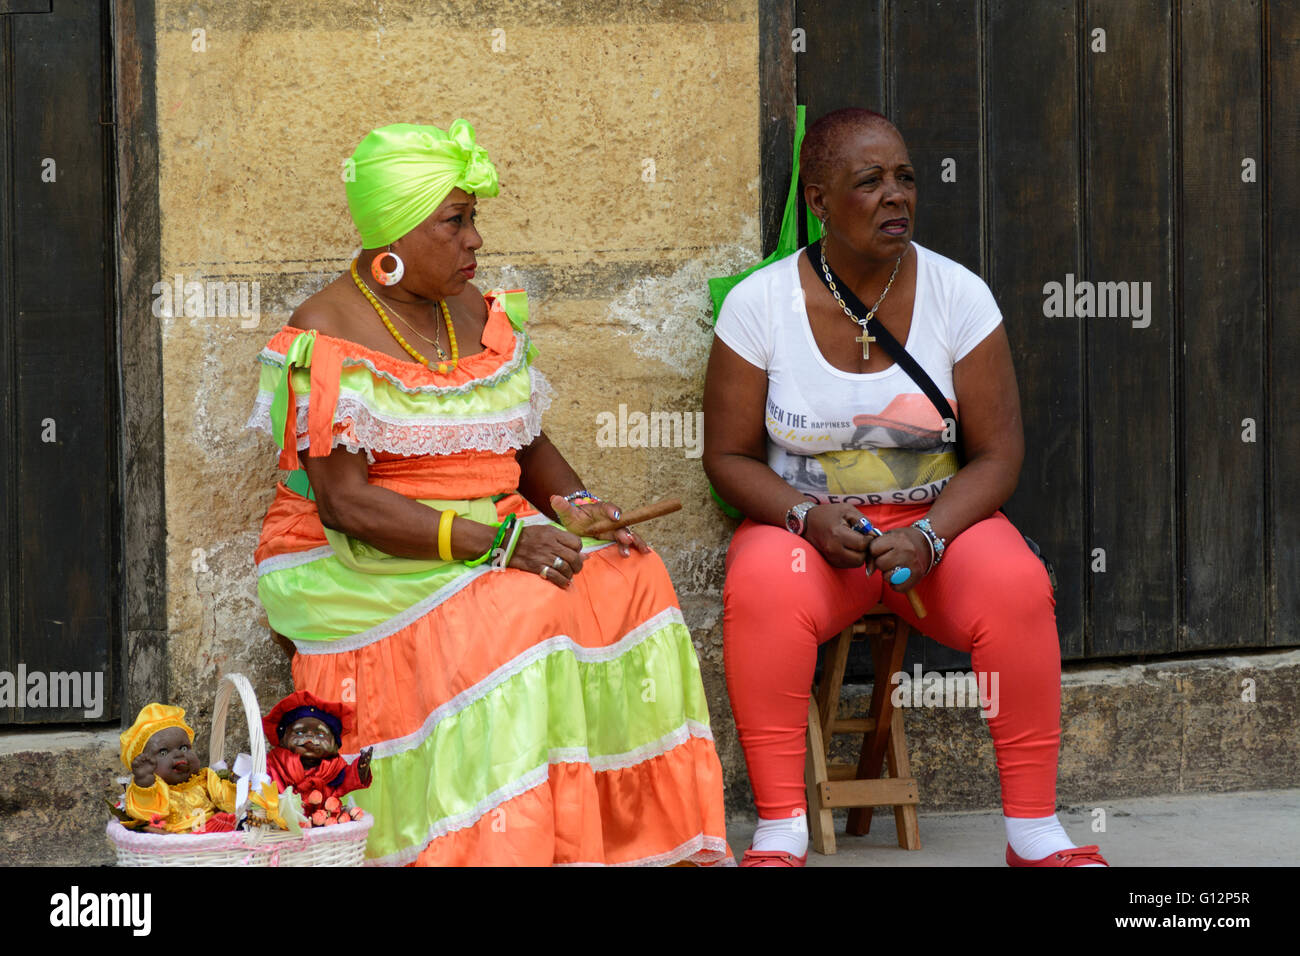 A Cuban doll seller wearing traditional costume and smoking a cigar relaxes with a companion in Old Havana, Havana, Cuba Stock Photo